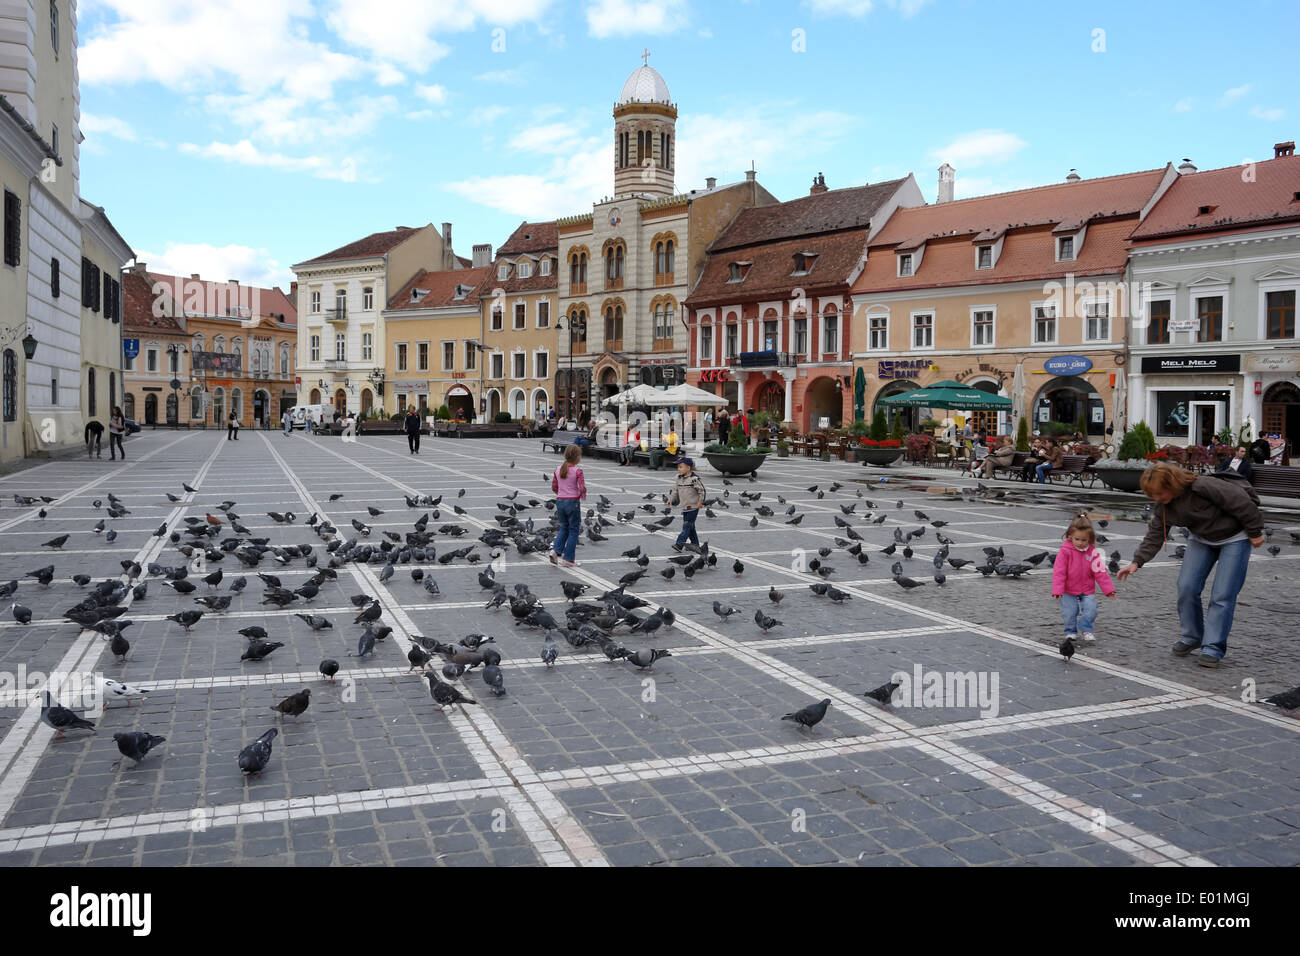 The birds and people on the Council Square in Brasov. Romania. Stock Photo